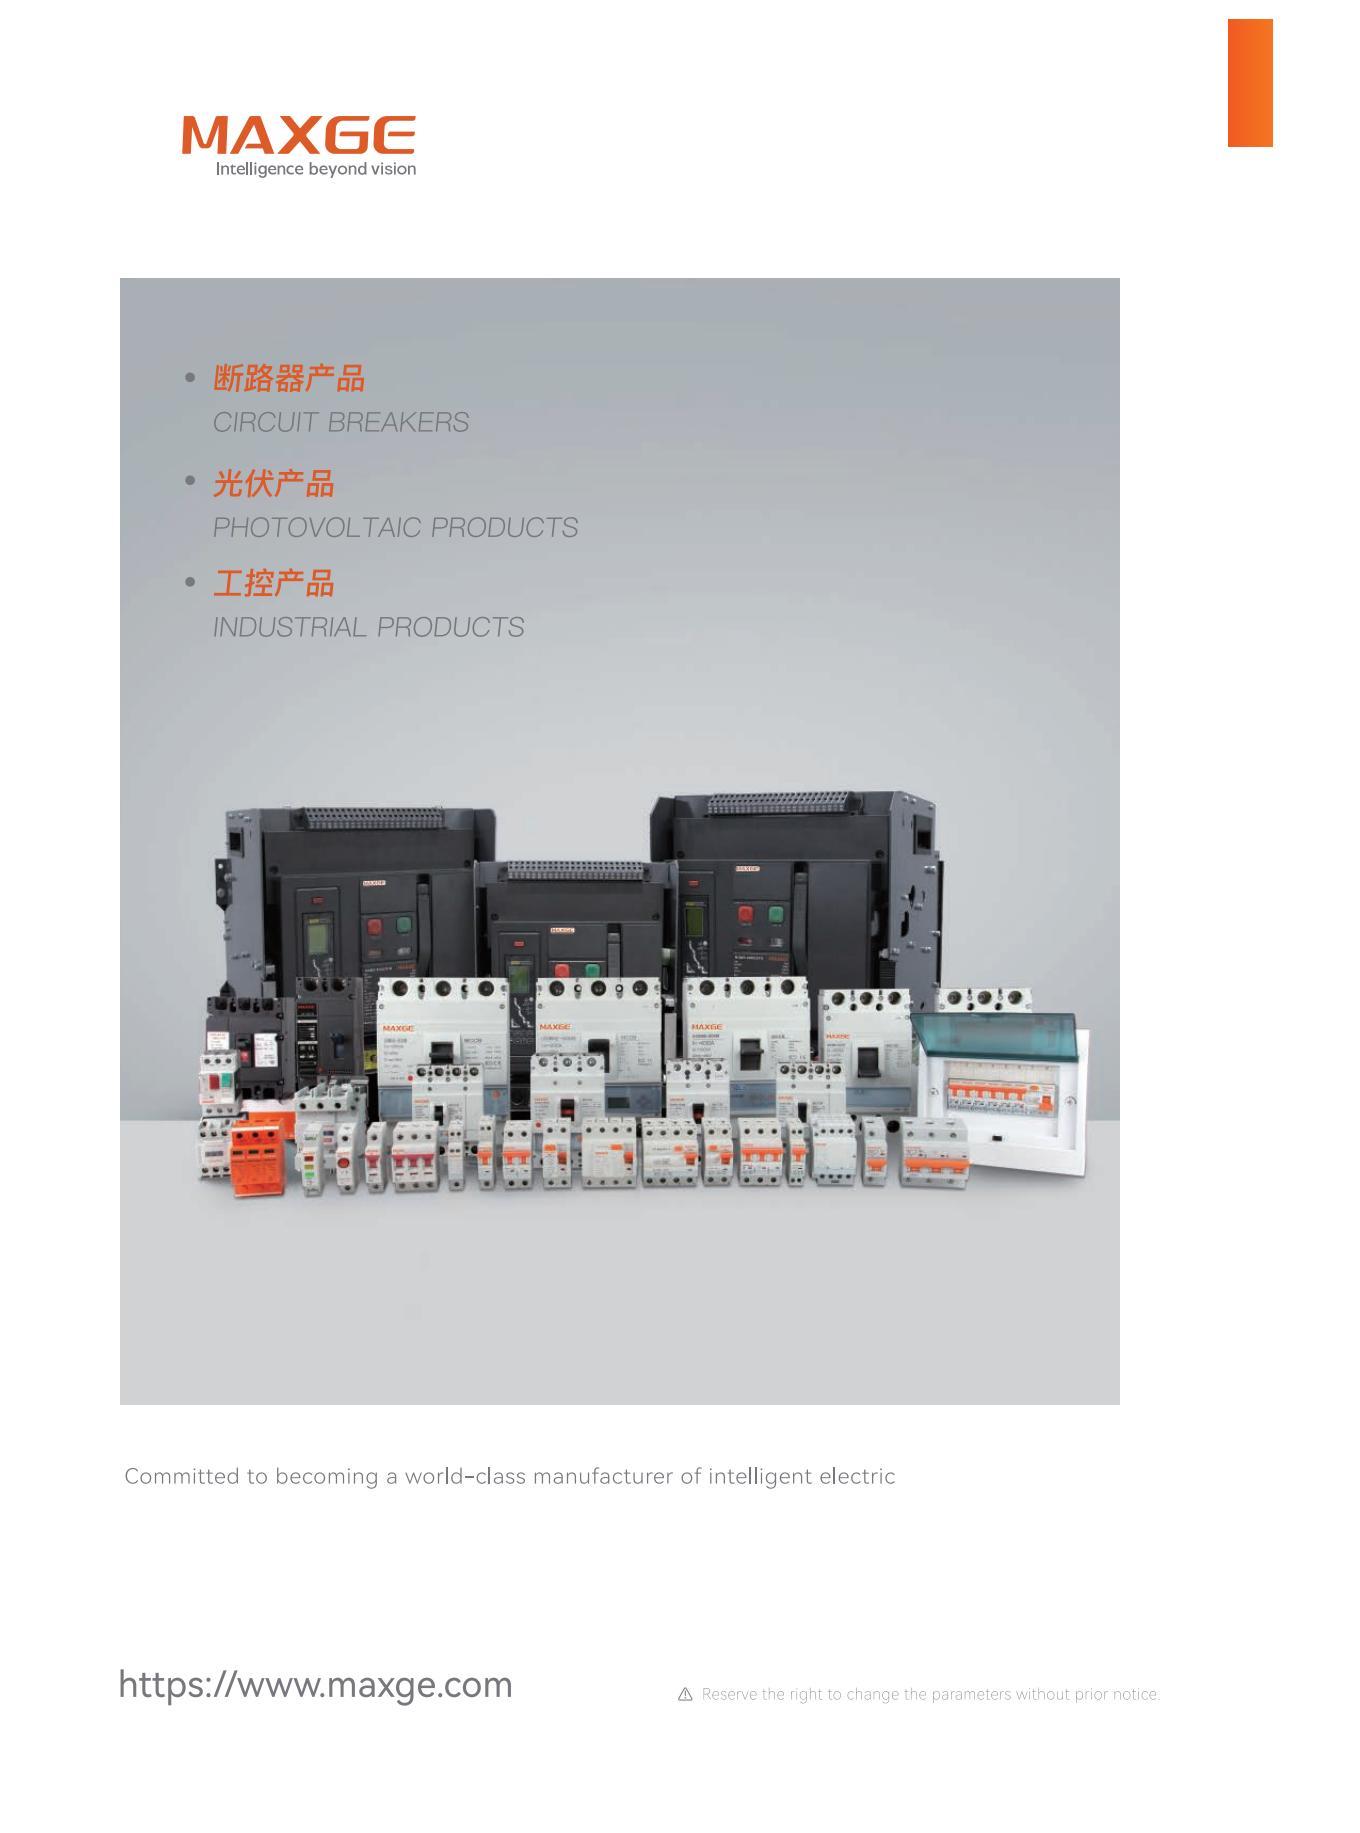 MAXGE ELECTRIC New product Brochure